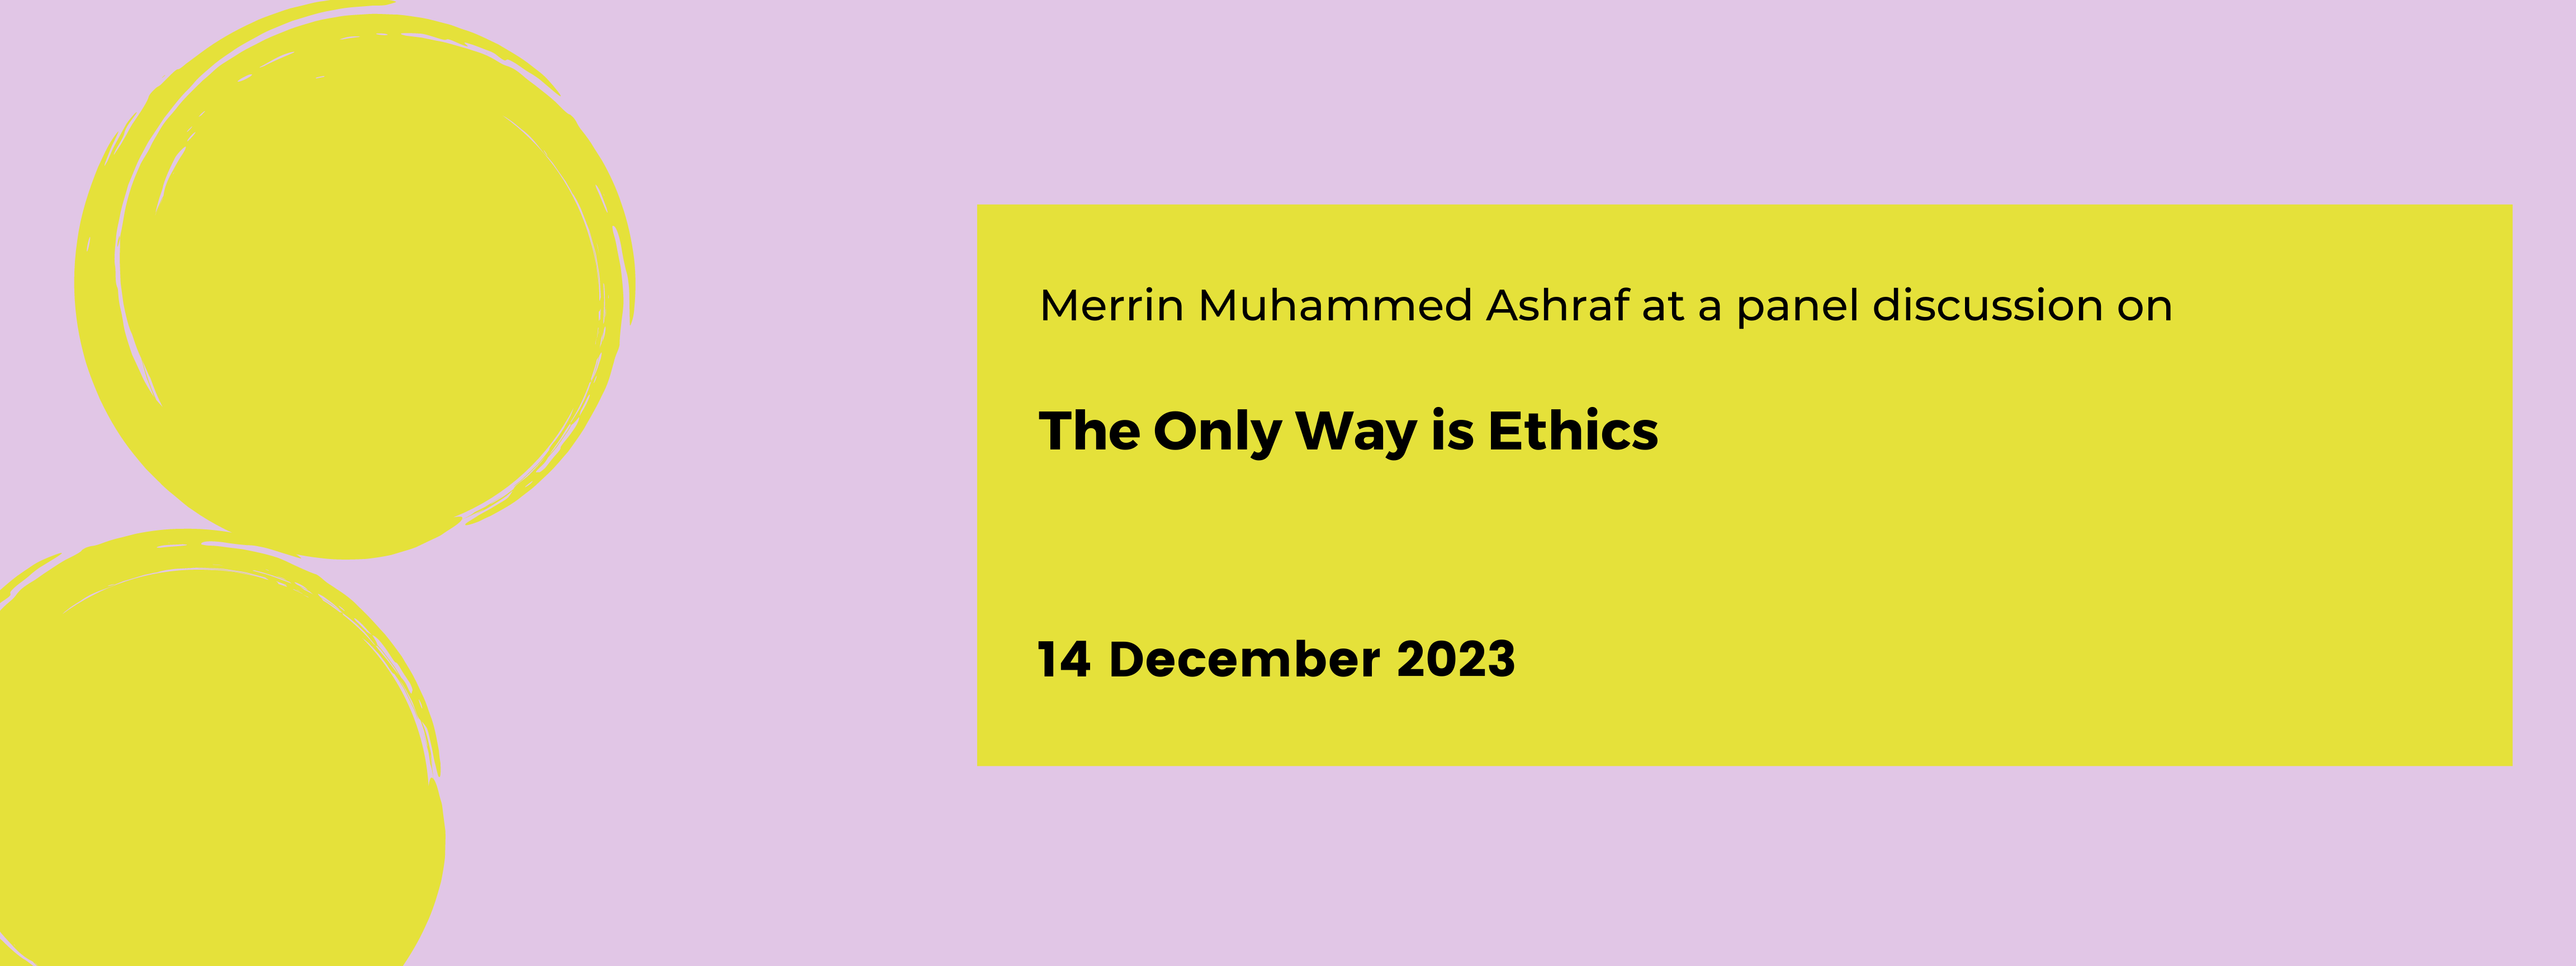 The Only Way is Ethics